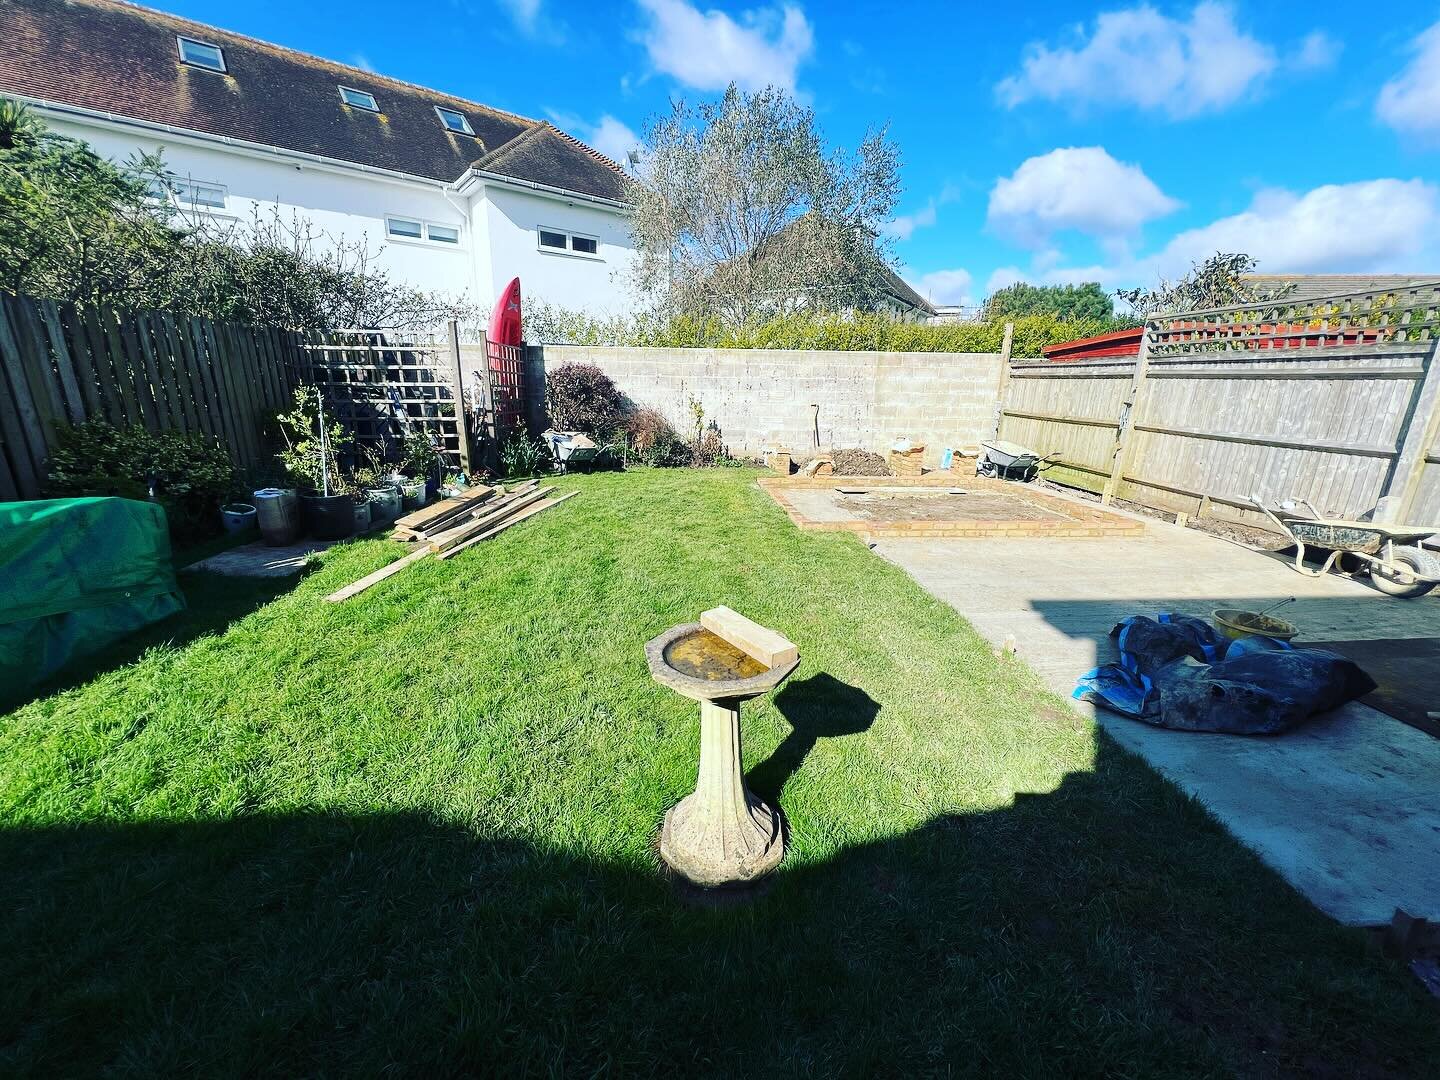 Just been to see some clients this morning.  Good to see the movements from when I first saw the garden and the hard landscaping so far.  Not long till the end on this one, can wait to show the difference! 😁🌱🪴🏡 #gardeninspiration #gardenlove #gar